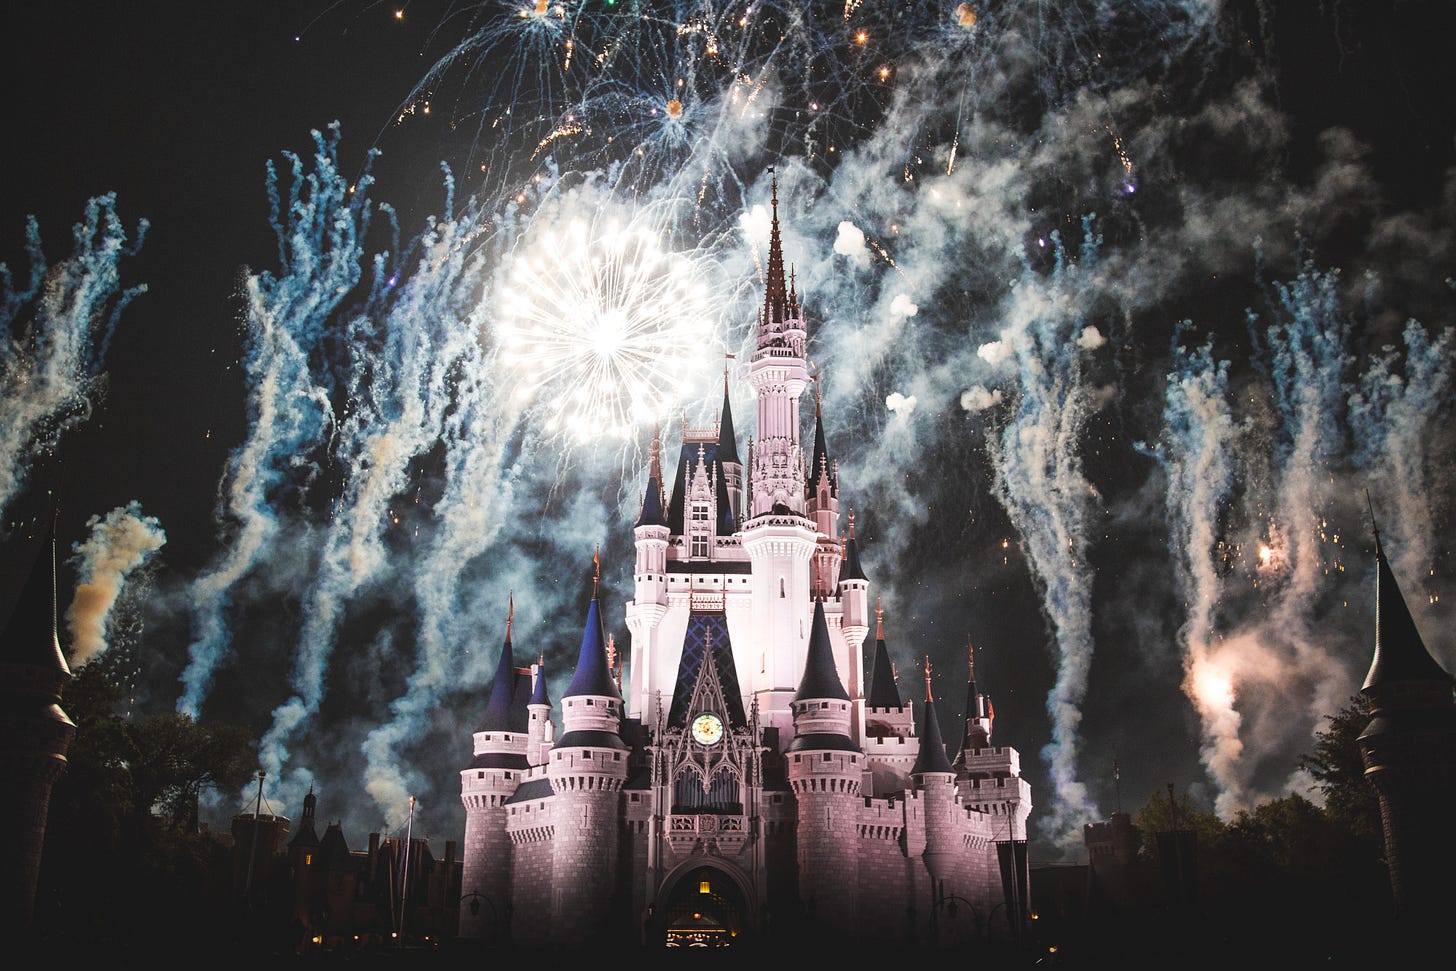 Wishes: A Magical Gathering of Disney Dreams - Wikipedia